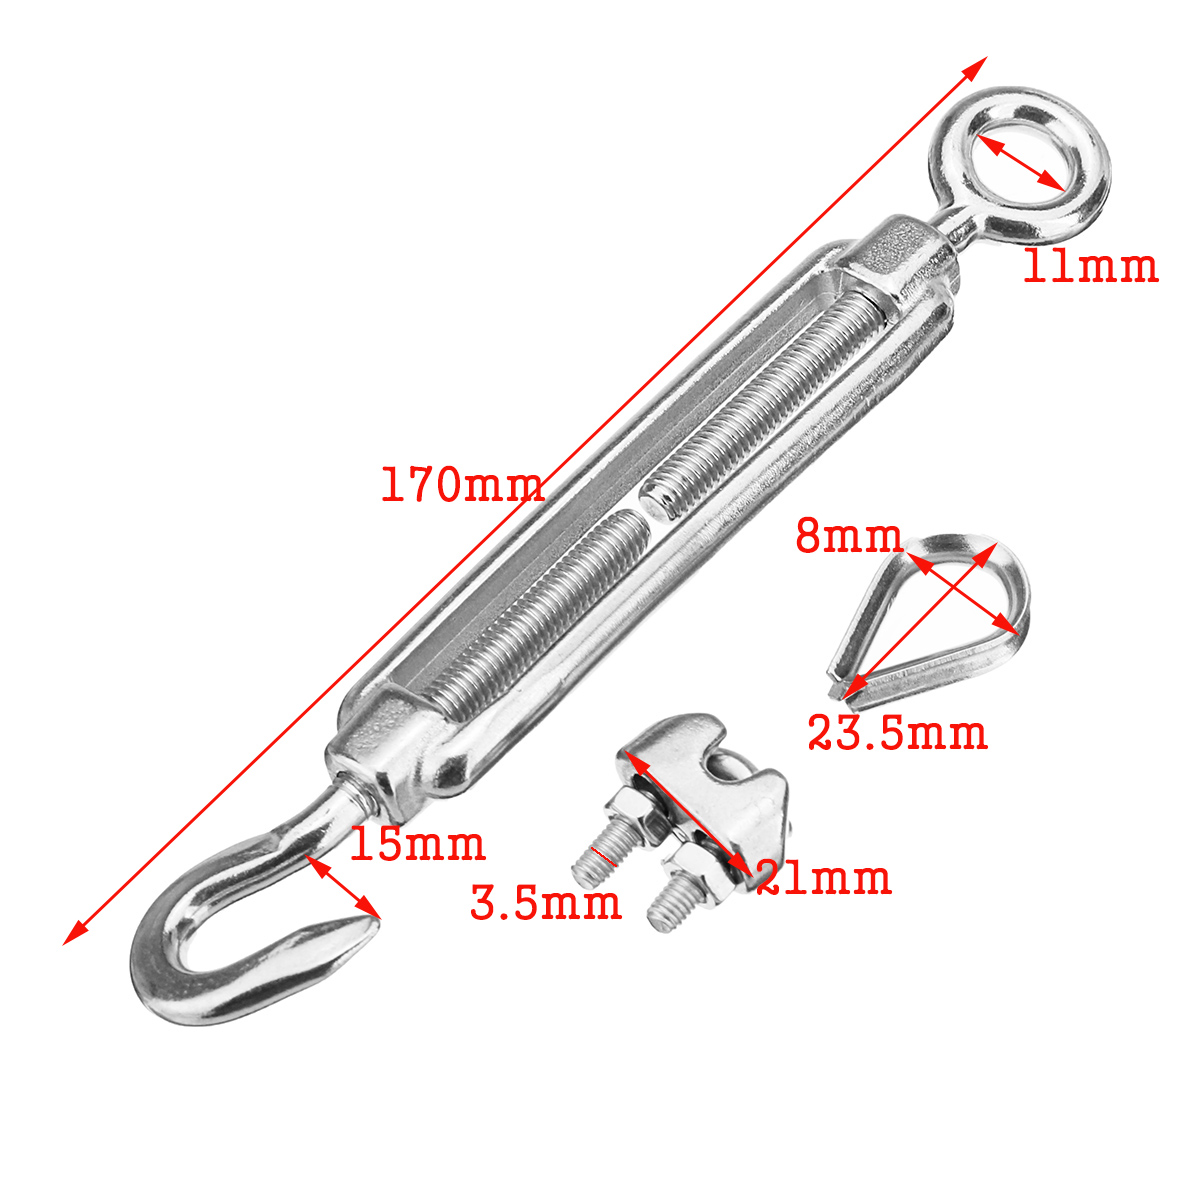 M6-Turnbuckles-M3-Stainless-Steel-Wire-Rope-Thimble-M3-Clip-Swage-for-Marine-Boat-Shade-Sail-1312546